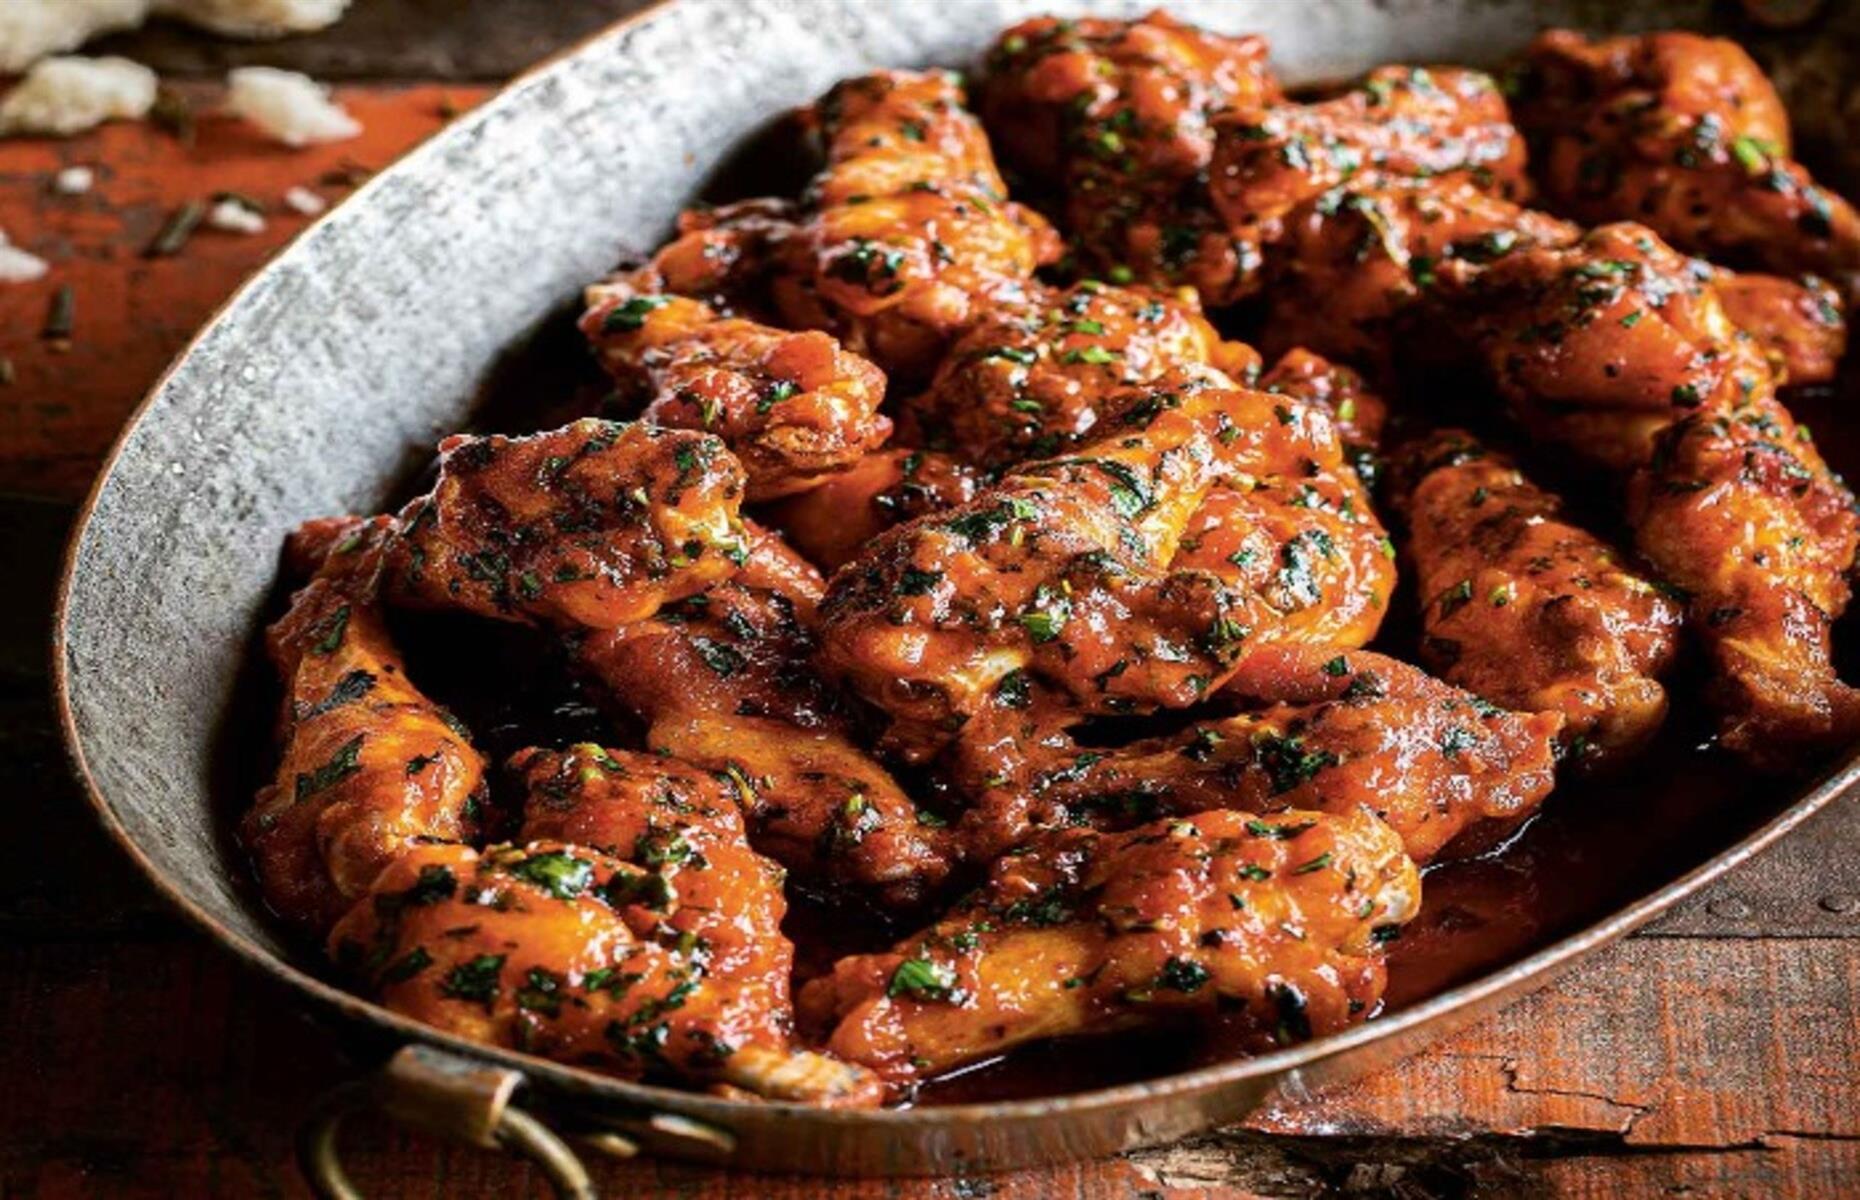 We've tracked down the top chicken wing recipes you need to try